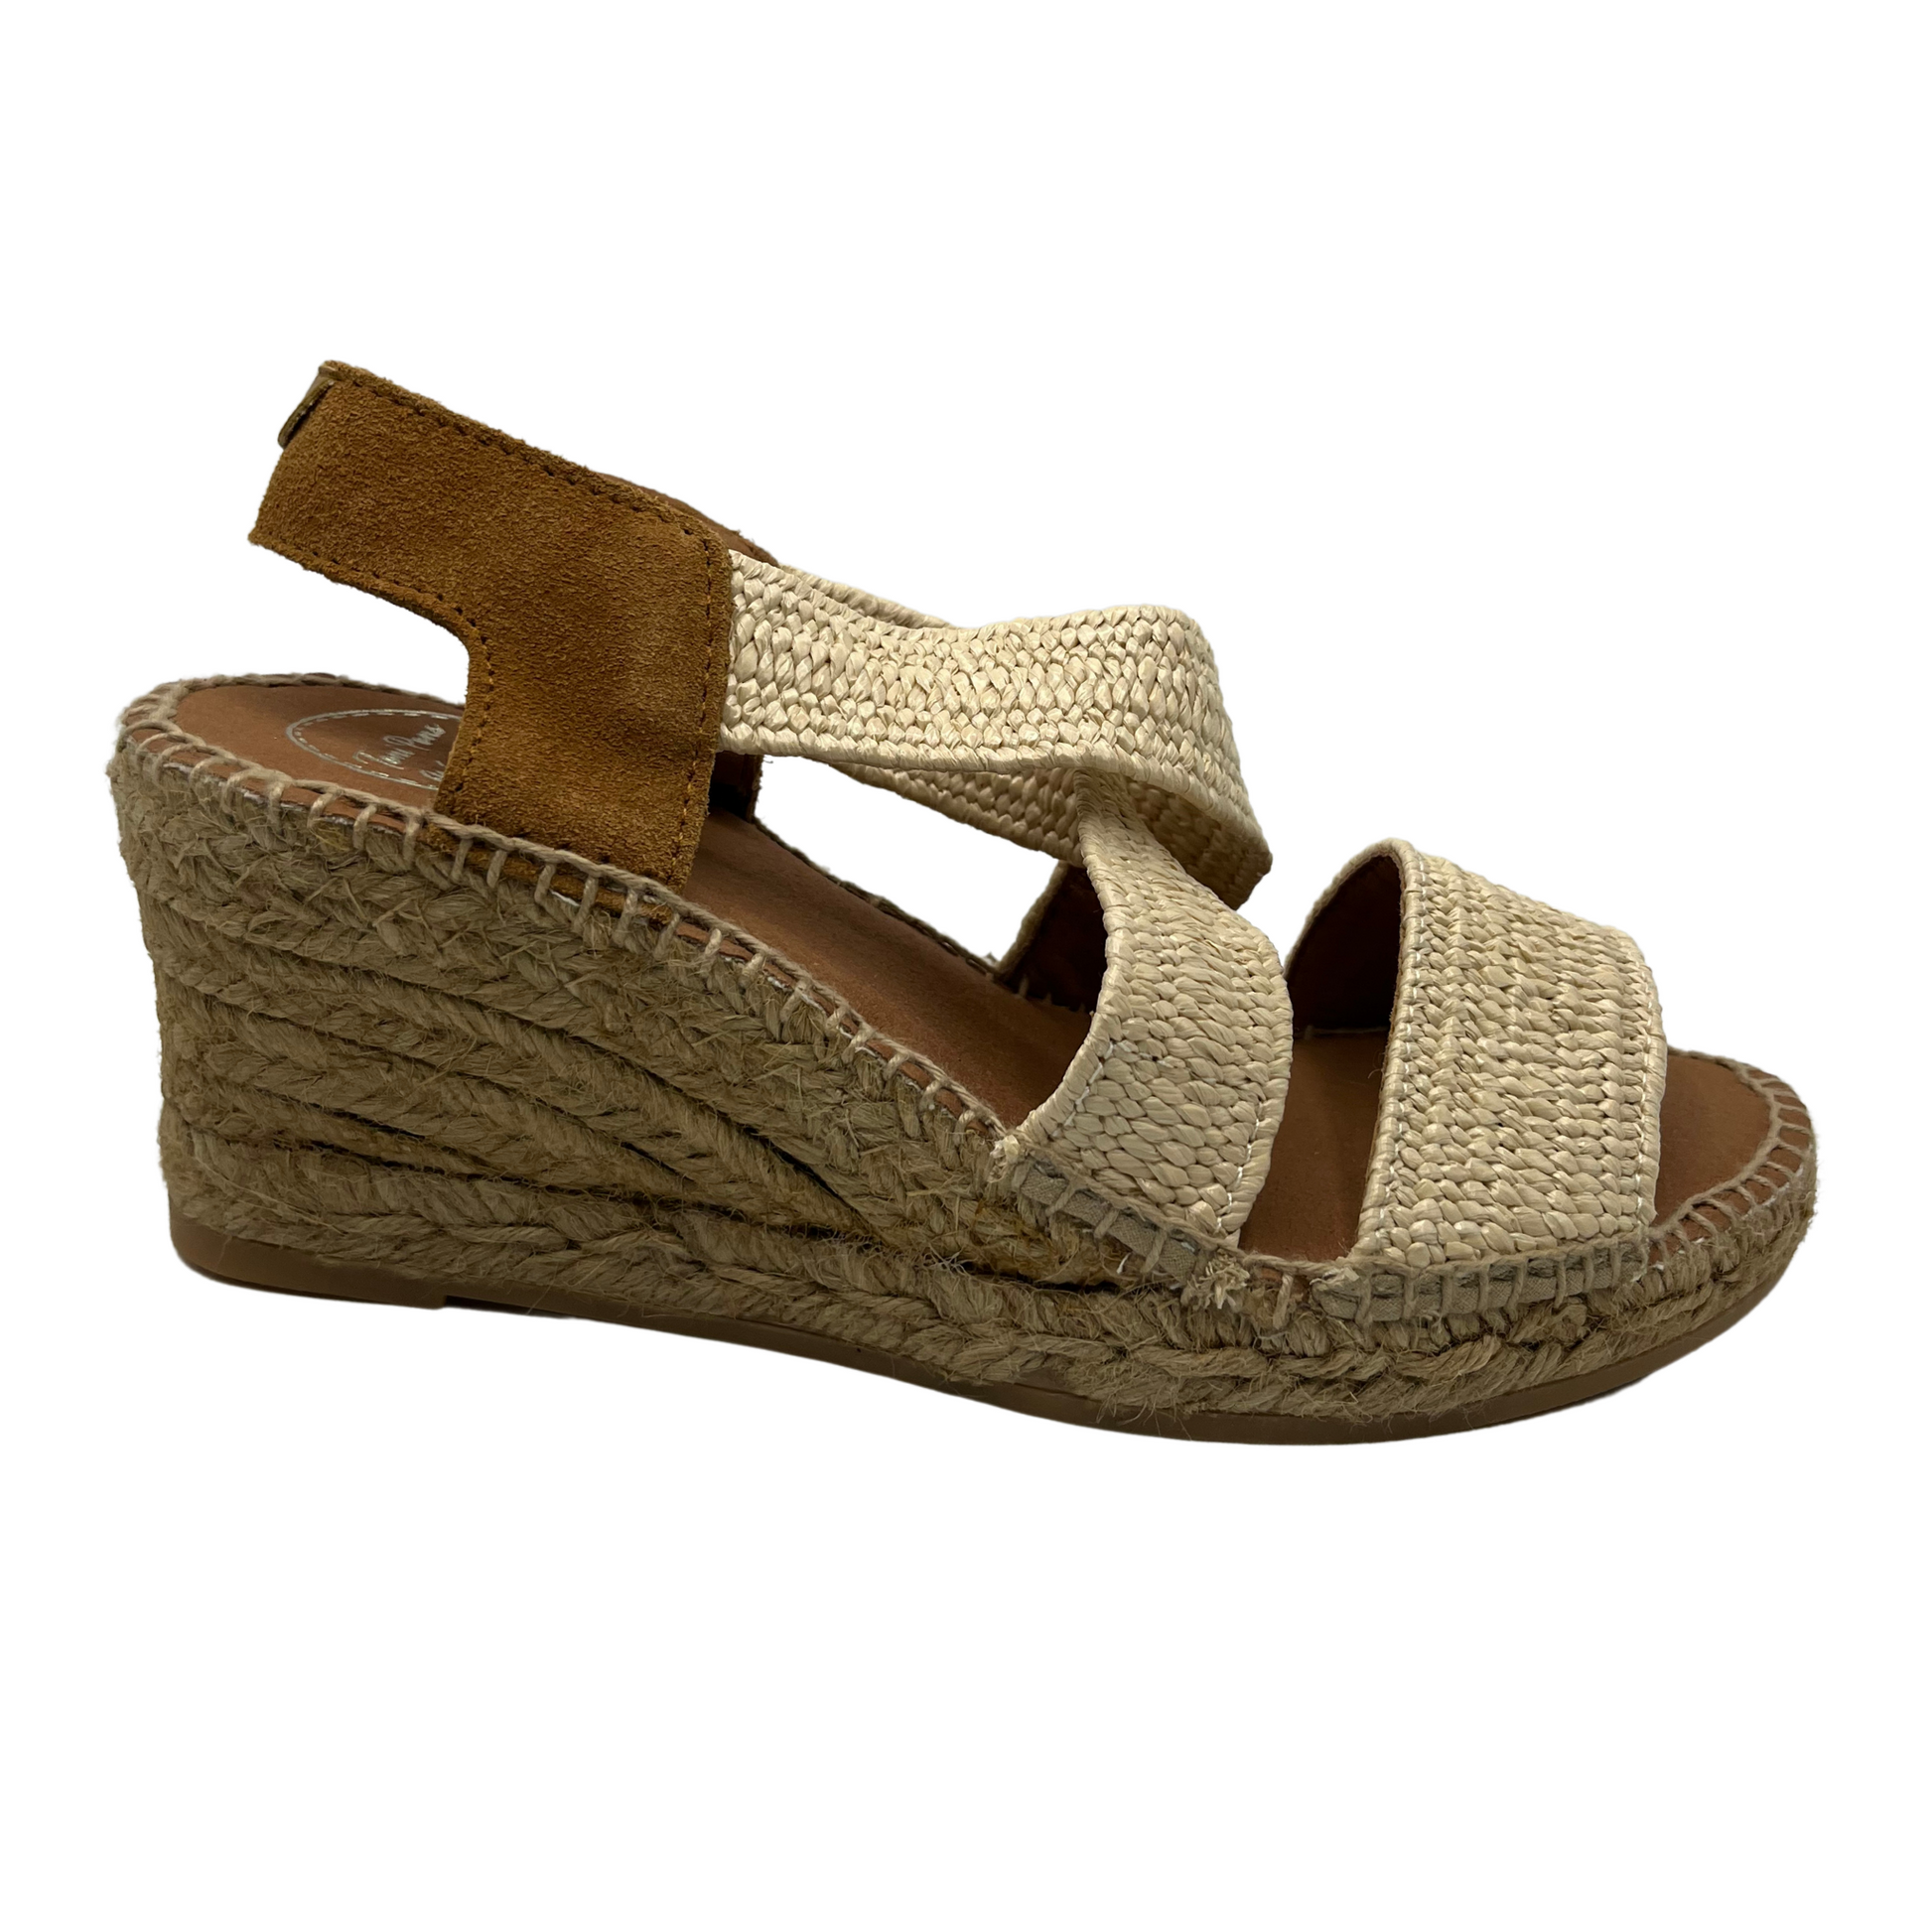 Right facing view of wedge heel with cross over straps and suede sling back strap